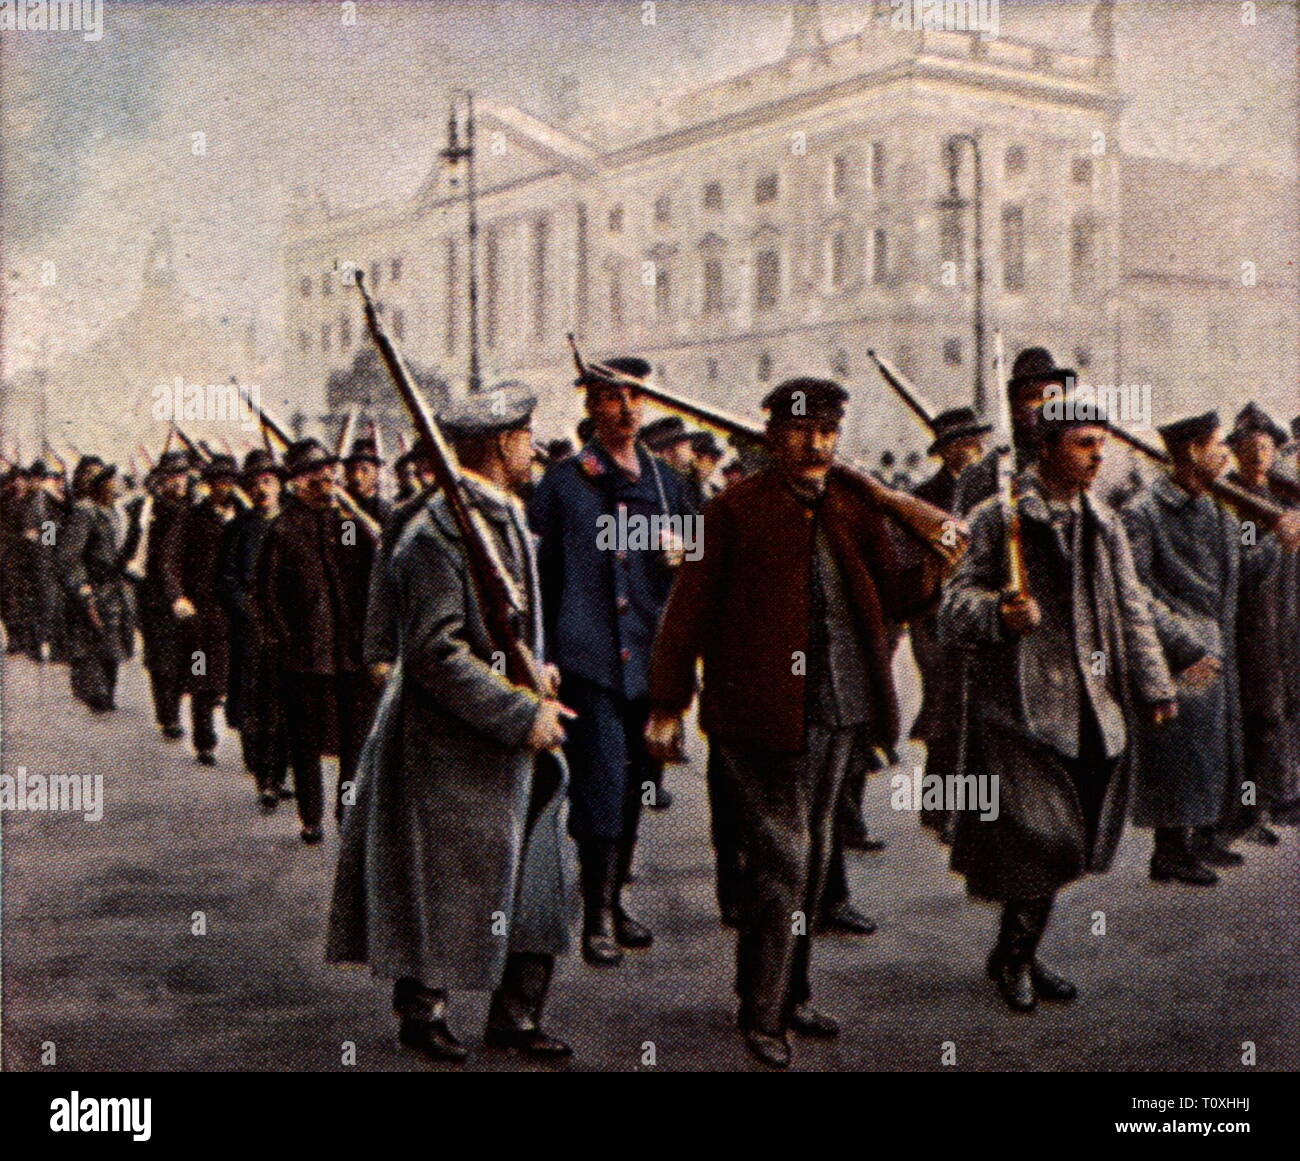 German Revolution 1918 - 1919, armed worker's batallions on the Schlossplatz, Berlin, December 1918, coloured photograph, cigarette card, series 'Die Nachkriegszeit', 1935, People's Navy Division, revolutionist, revolutionists, workers, worker, soldiers, soldier, armed, weapons, arms, weapon, arm, Prussia, German Revolution of 1918-1919, Germany, German Reich, Weimar Republic, rally, people, 20th century, 1930s, revolution, revolutions, armed man, armed person, gun, coloured, colored, post war period, post-war period, post-war years, post-war era, Additional-Rights-Clearance-Info-Not-Available Stock Photo